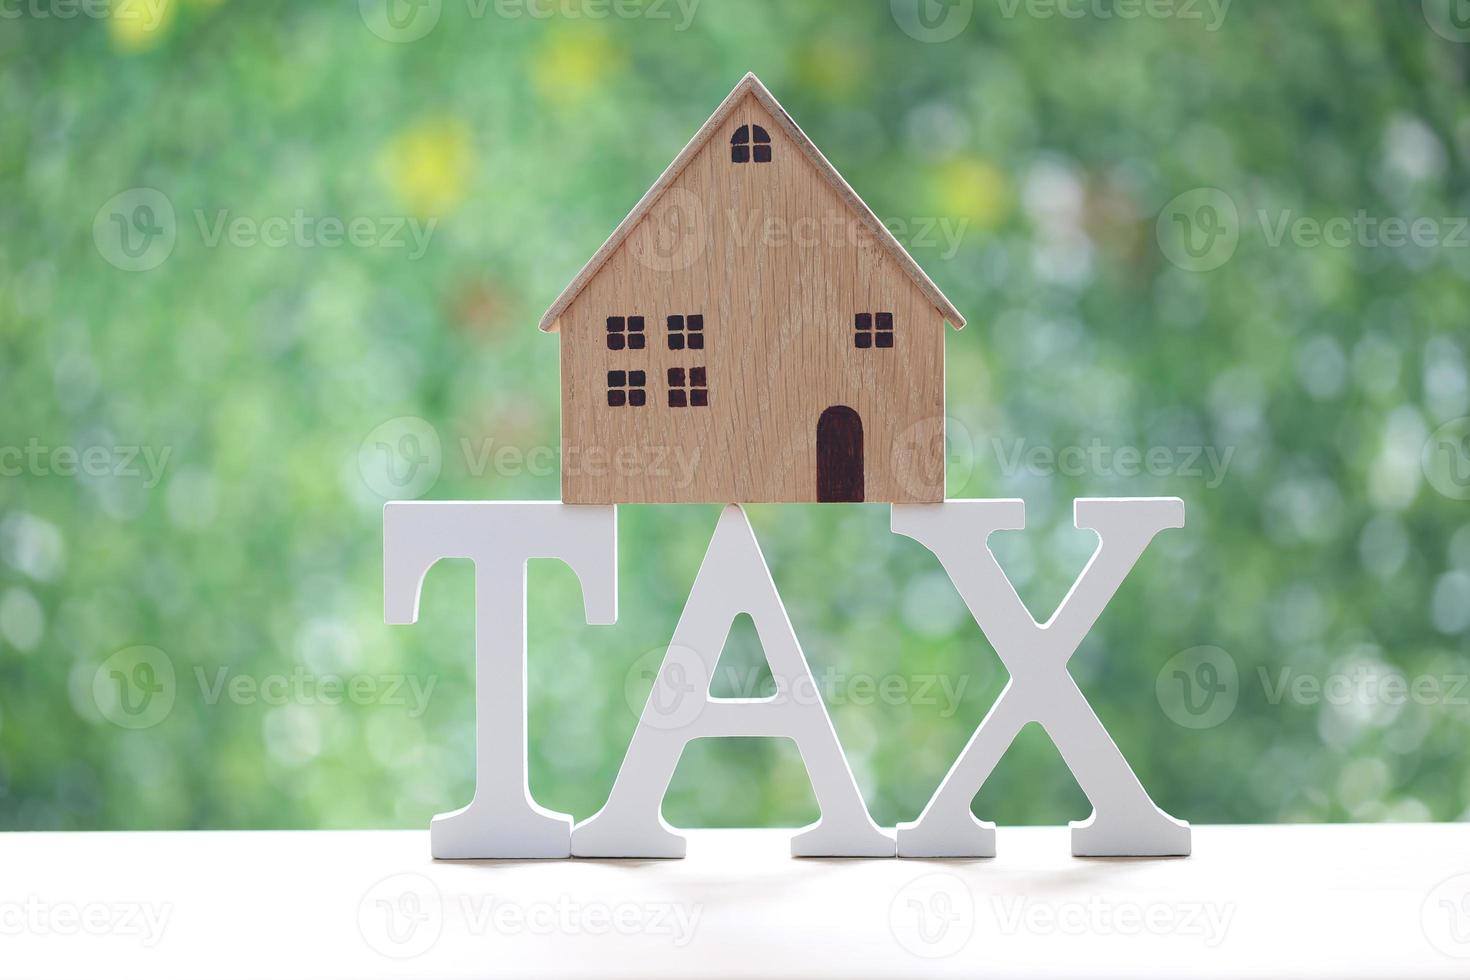 Estate tax,Model house on tax word and calculator on natural green background,Business investment and Property tax concept photo